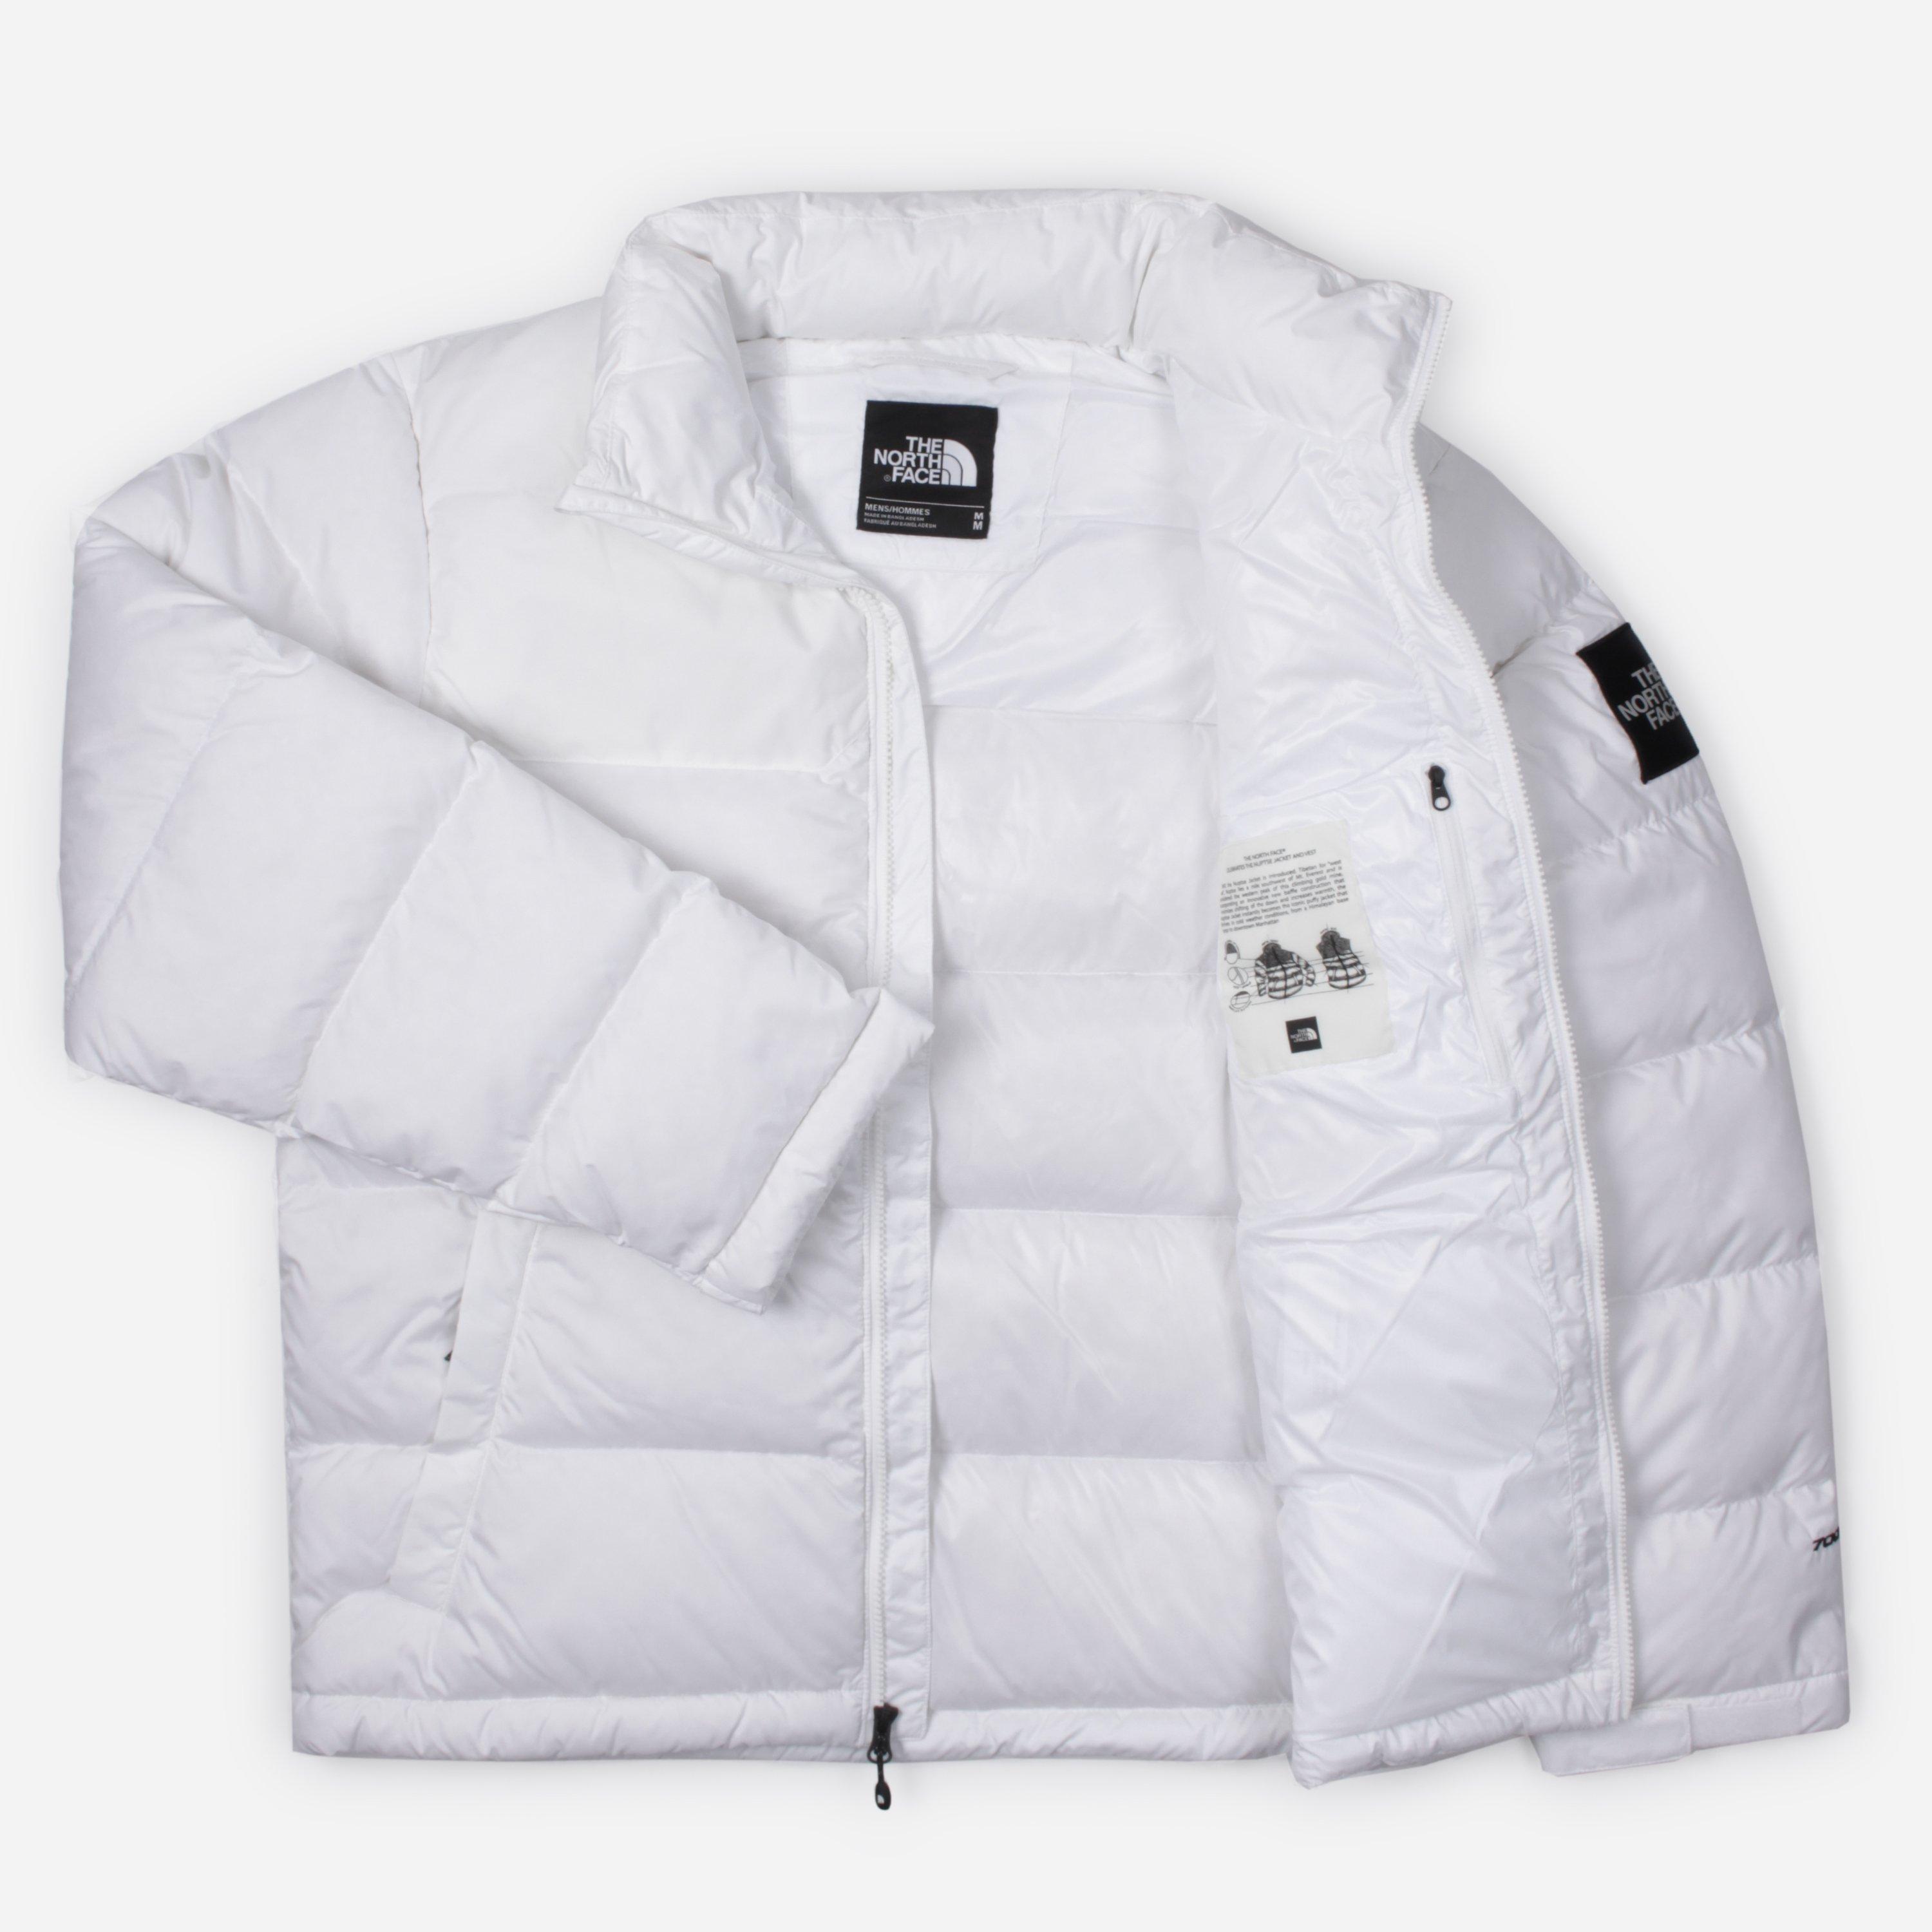 the north face white jacket mens